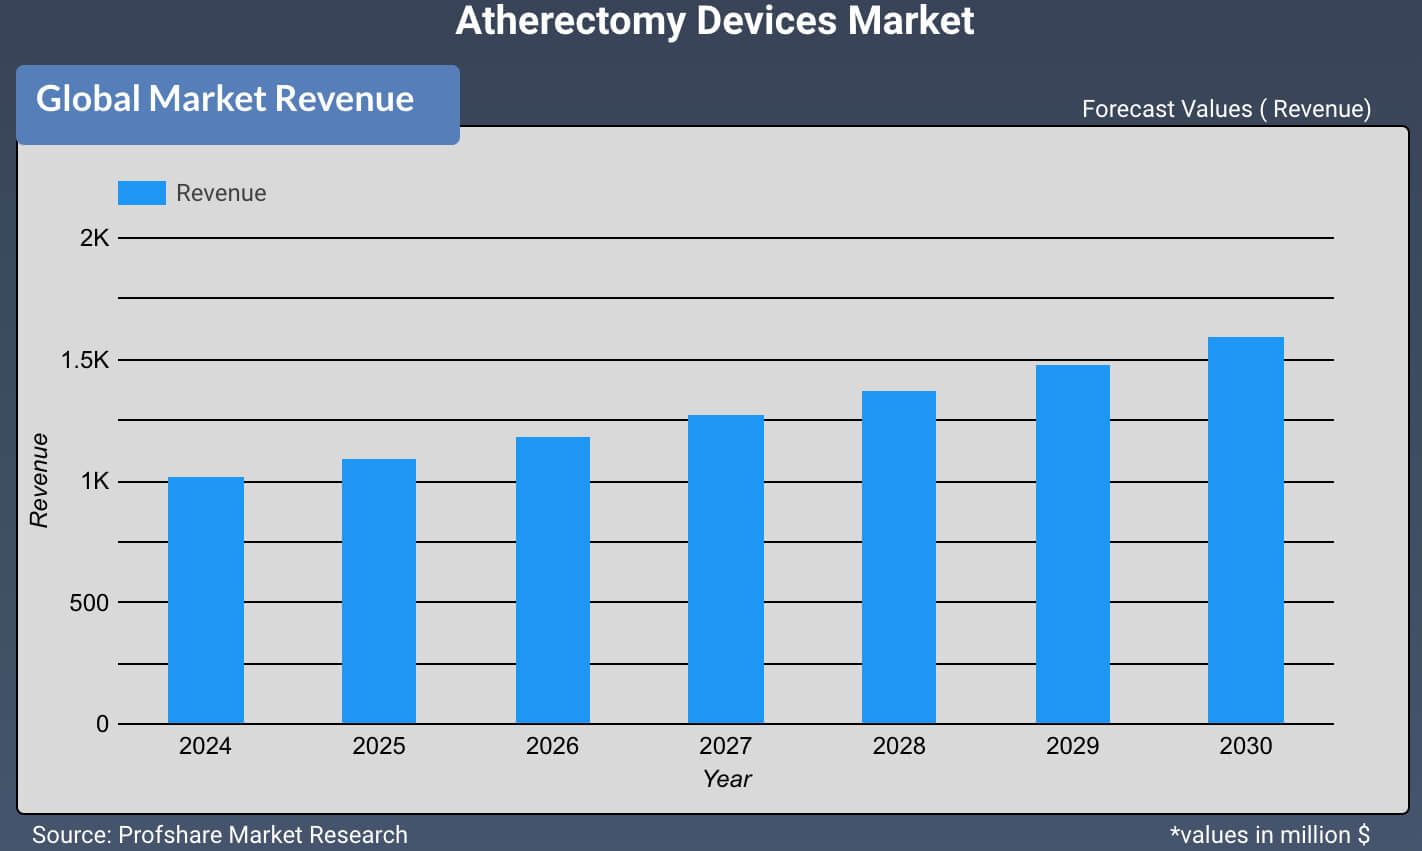 Atherectomy Devices Market